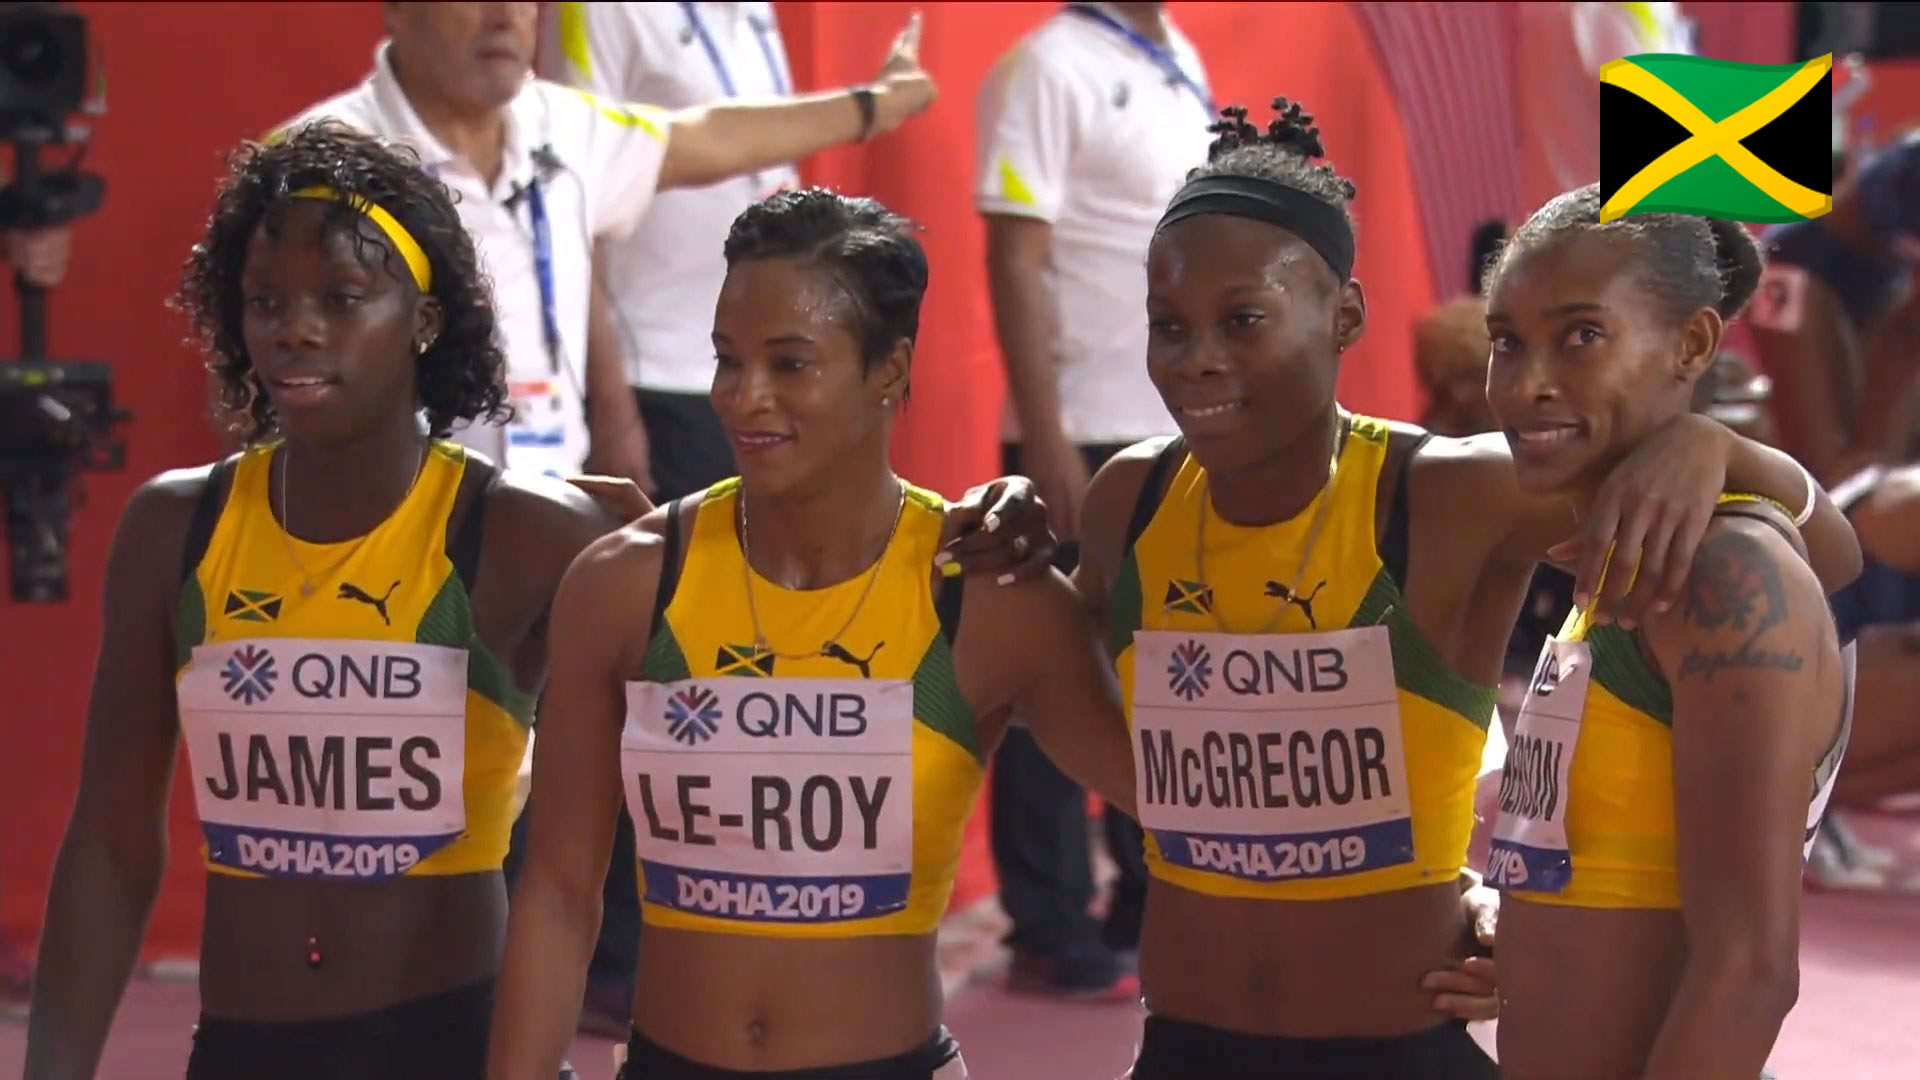 Watch: Team Jamaica wins Women's 4x400m relay in World leading time at World Champs